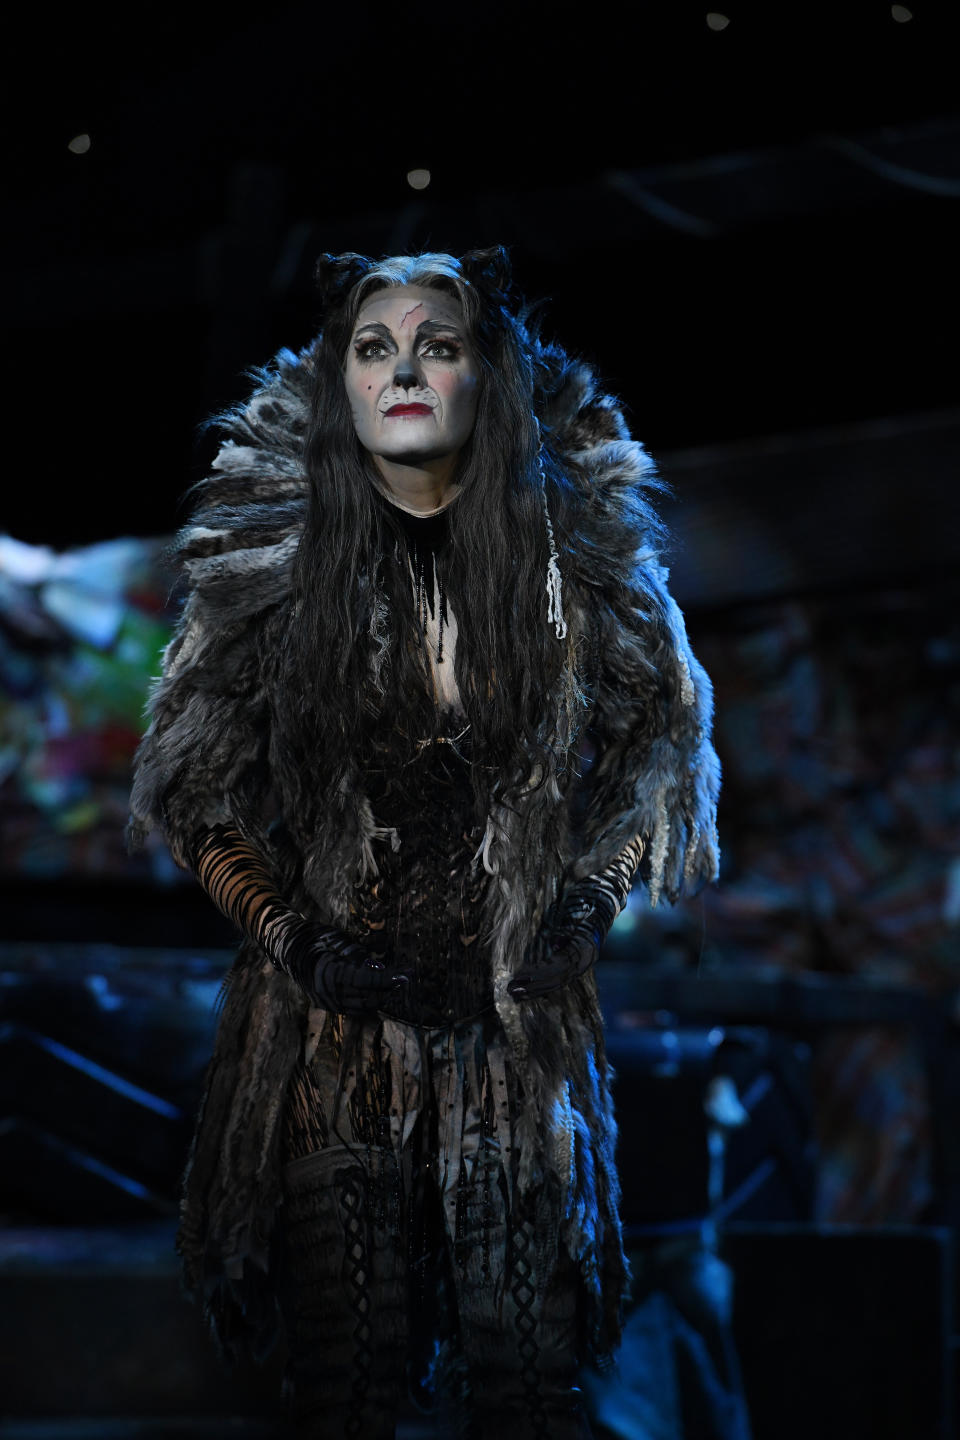 Grizabella in the London/West End Cats musical 2019 tour production by Cameron Mackintosh and Andrew Lloyd Webber's The Really Useful Theatre Group. (PHOTO: CATS Tour 2019/Alessandro Pinna)